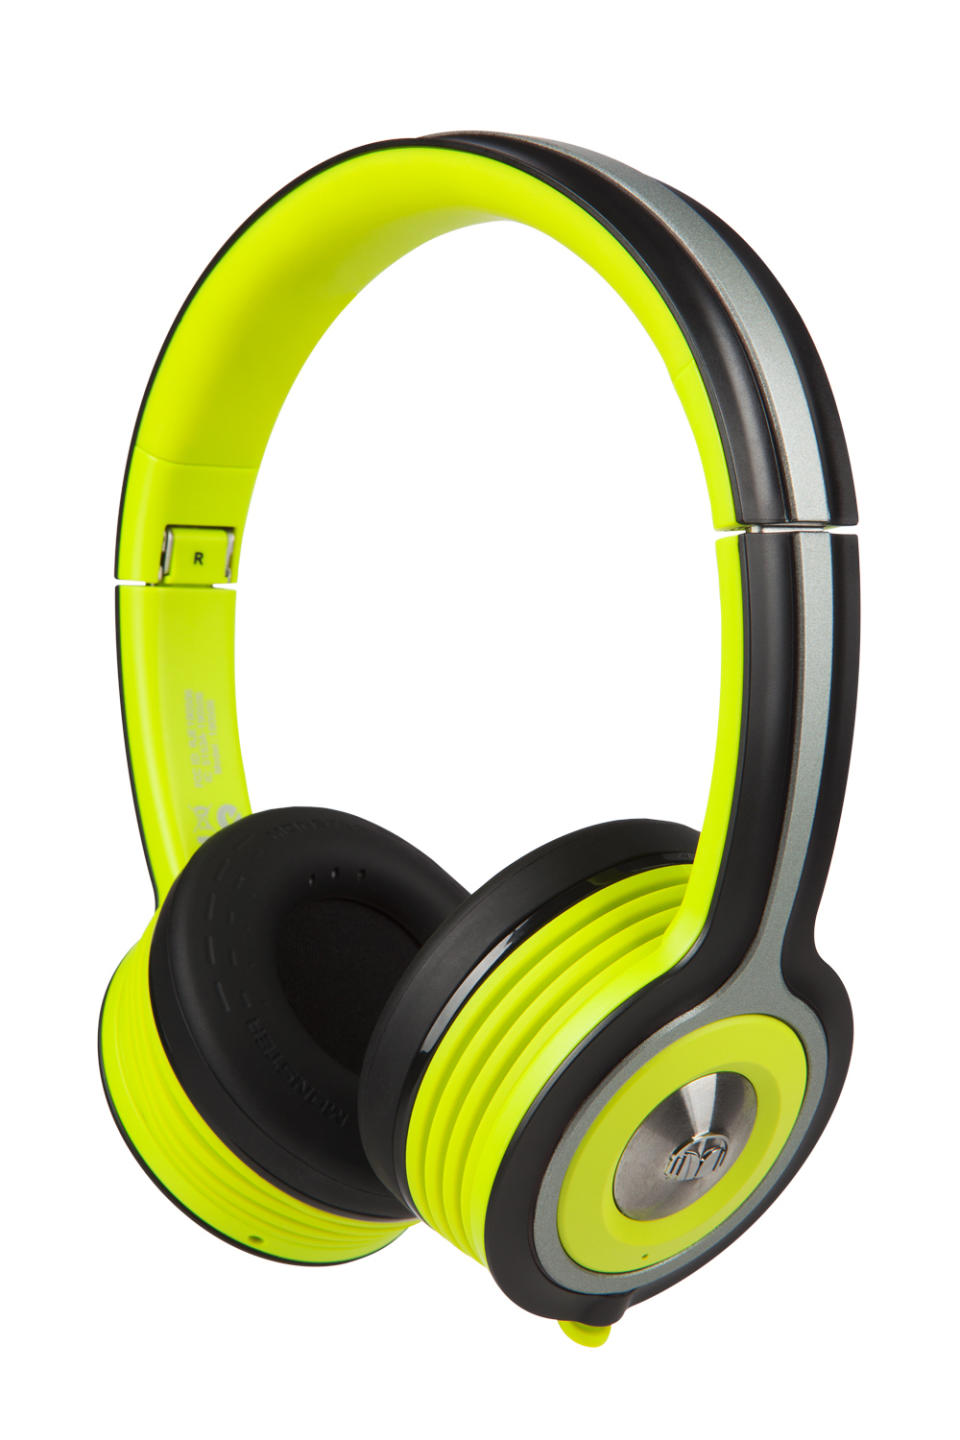 This photo provided by Monster, Inc. shows the Monster iSport Freedom headphones. Meant for a workout, these on-ear headphones are made of sweat-resistant plastic and rubbery material and will give you a tight-fitting hug. (AP Photo/Monster, Inc., Stephen Gutierrez)